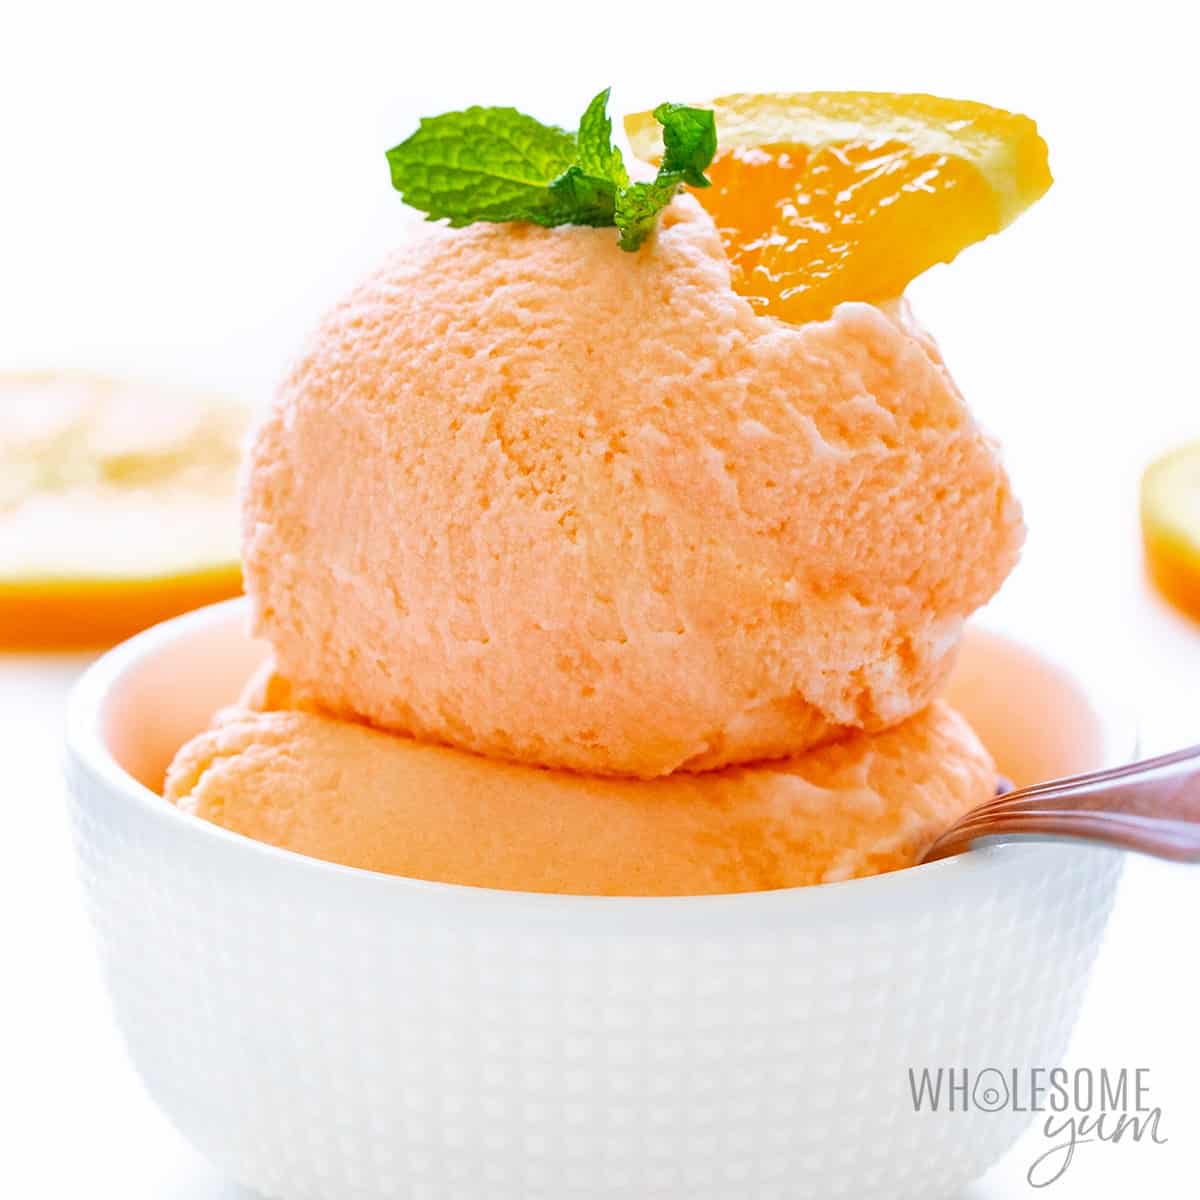 Scoops of keto sherbet in a bowl with orange segment and mint sprig